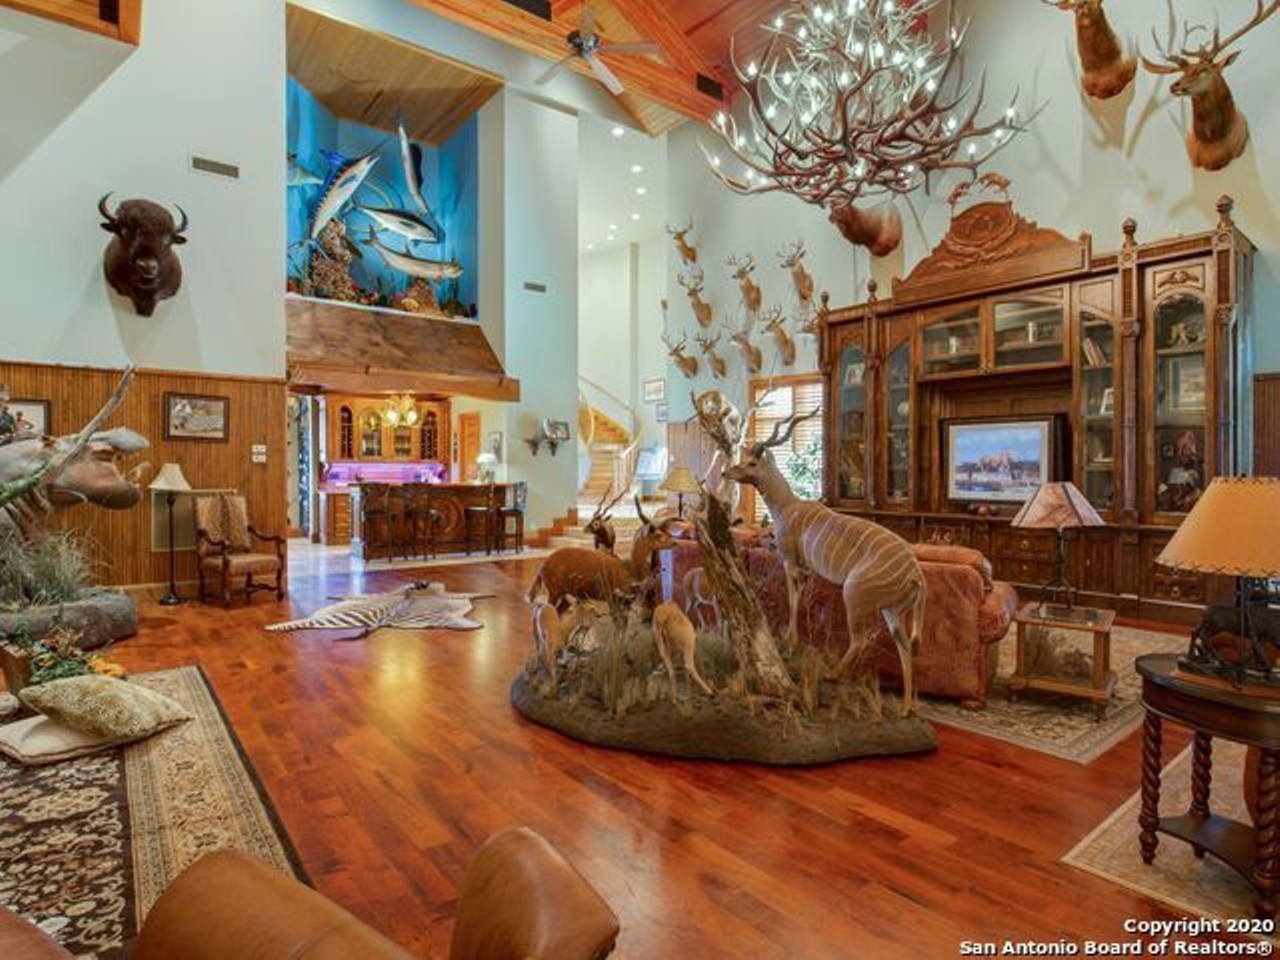 The Most Expensive San Antonio-Area House on the Market Is Full of Taxidermy and Insane Luxury